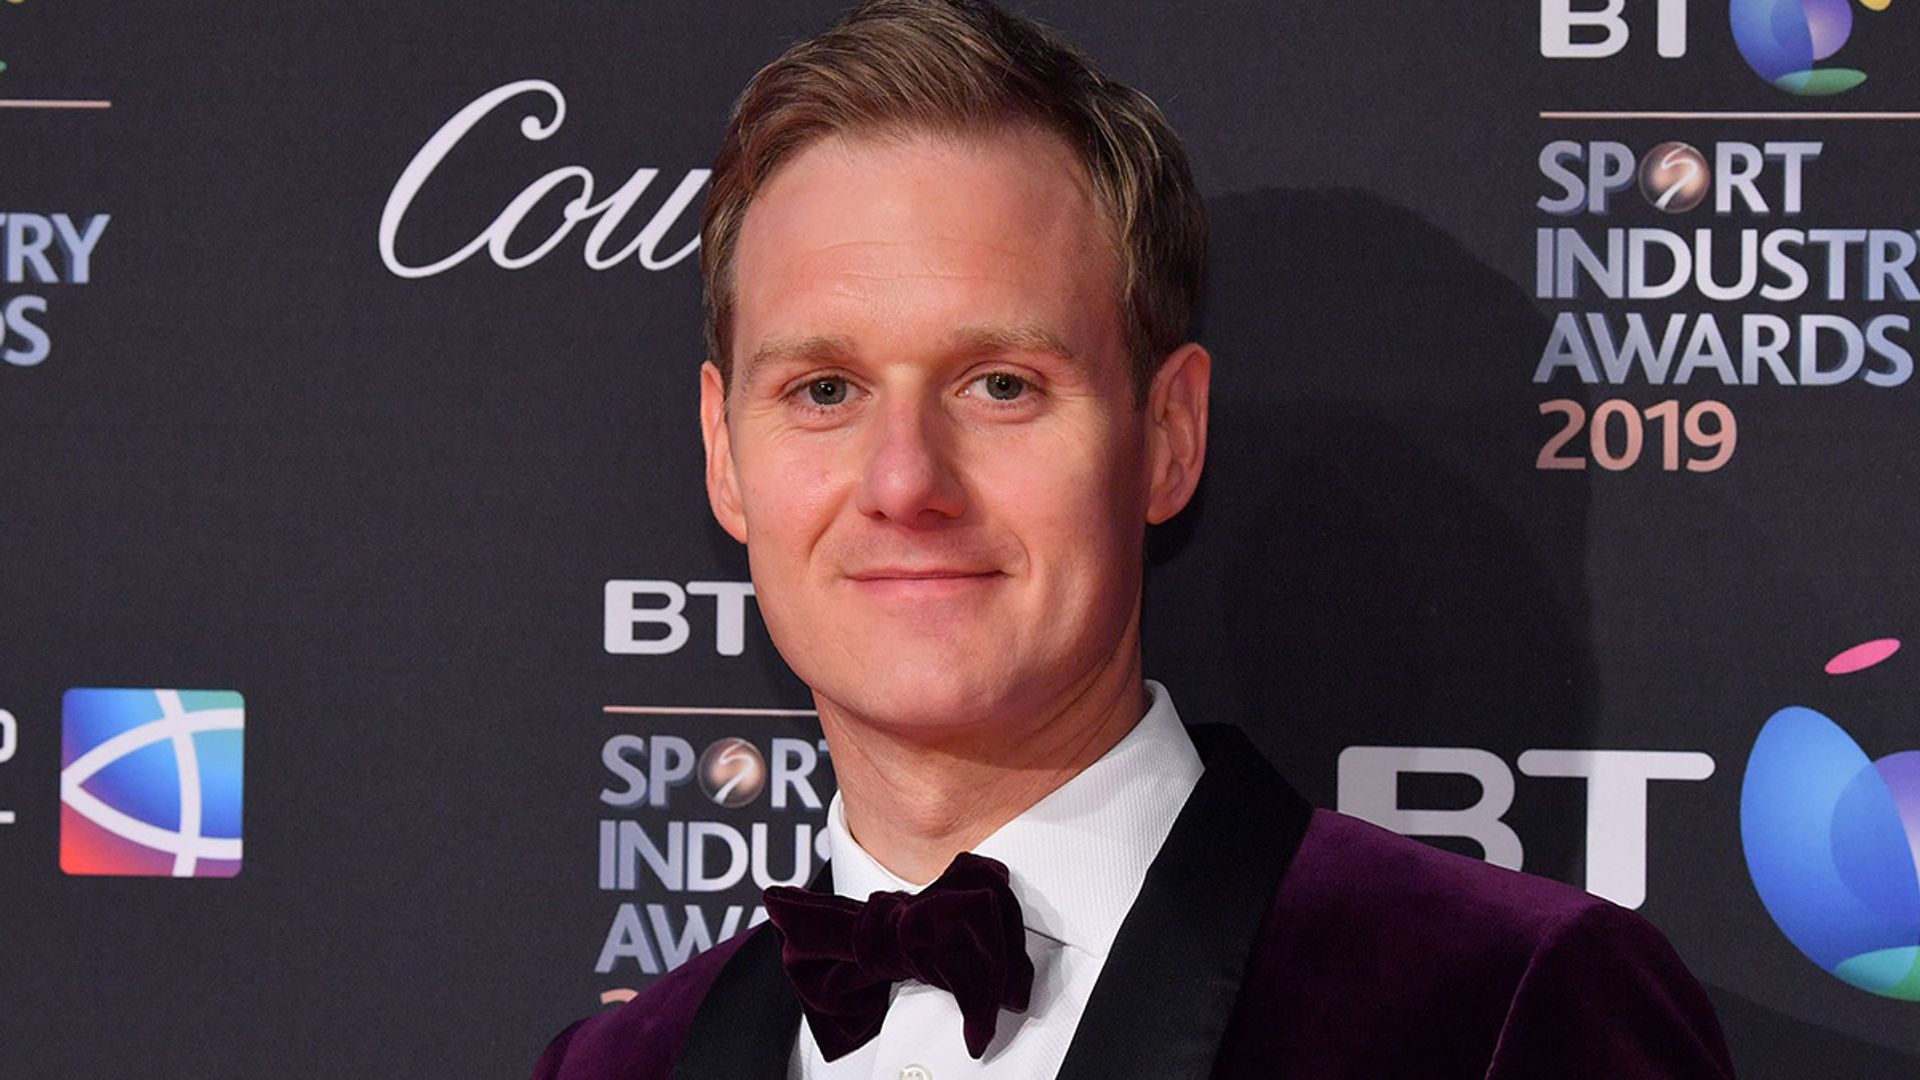 BBC Breakfast's Dan Walker shares rare glimpse into home life at Christmas